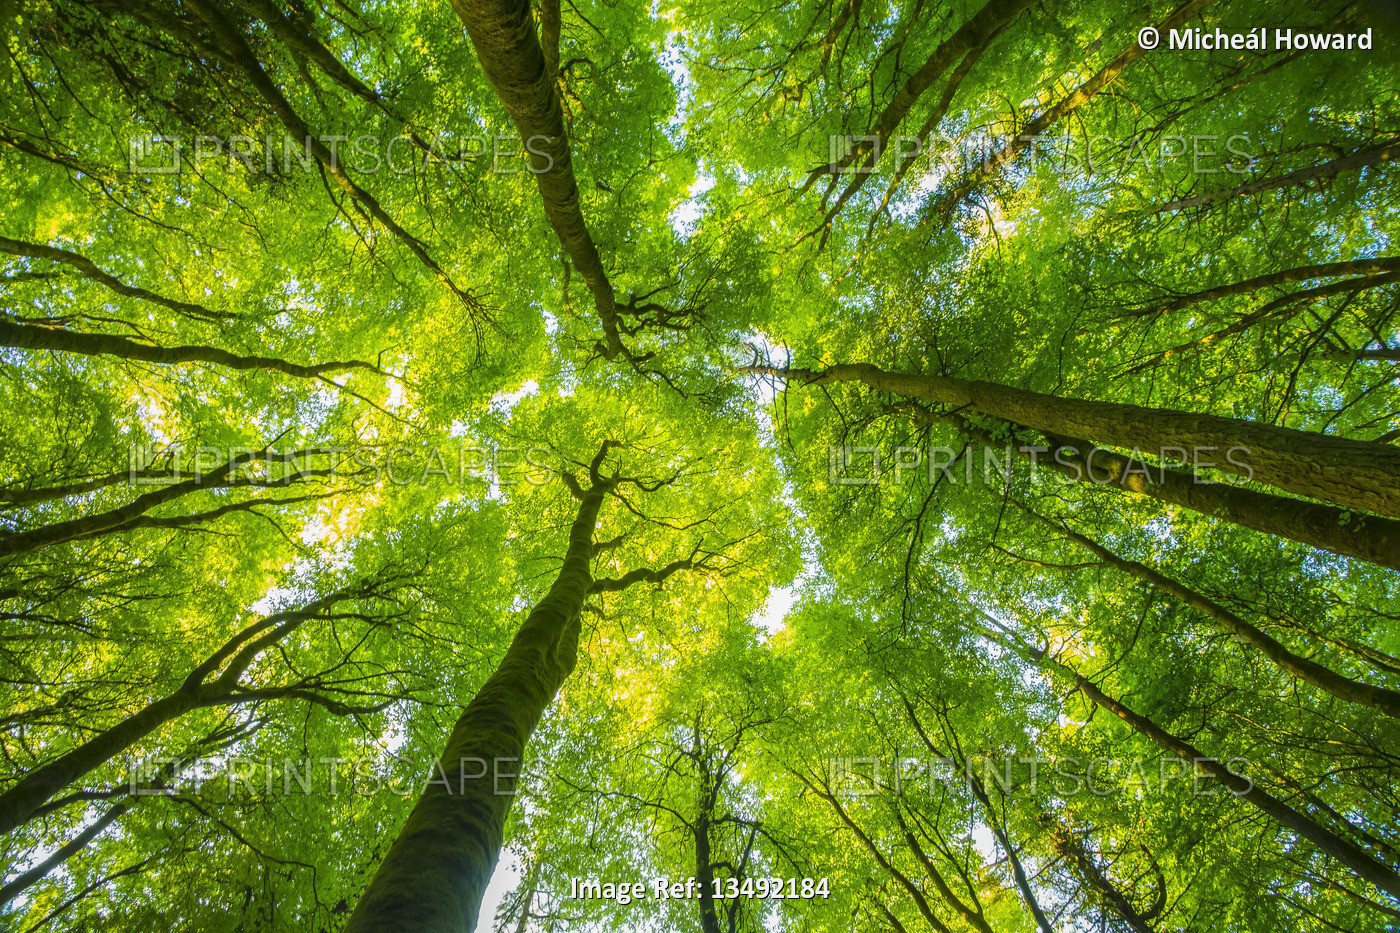 Looking up at the fractal patterns formed by the trees in the forest, Lough ...